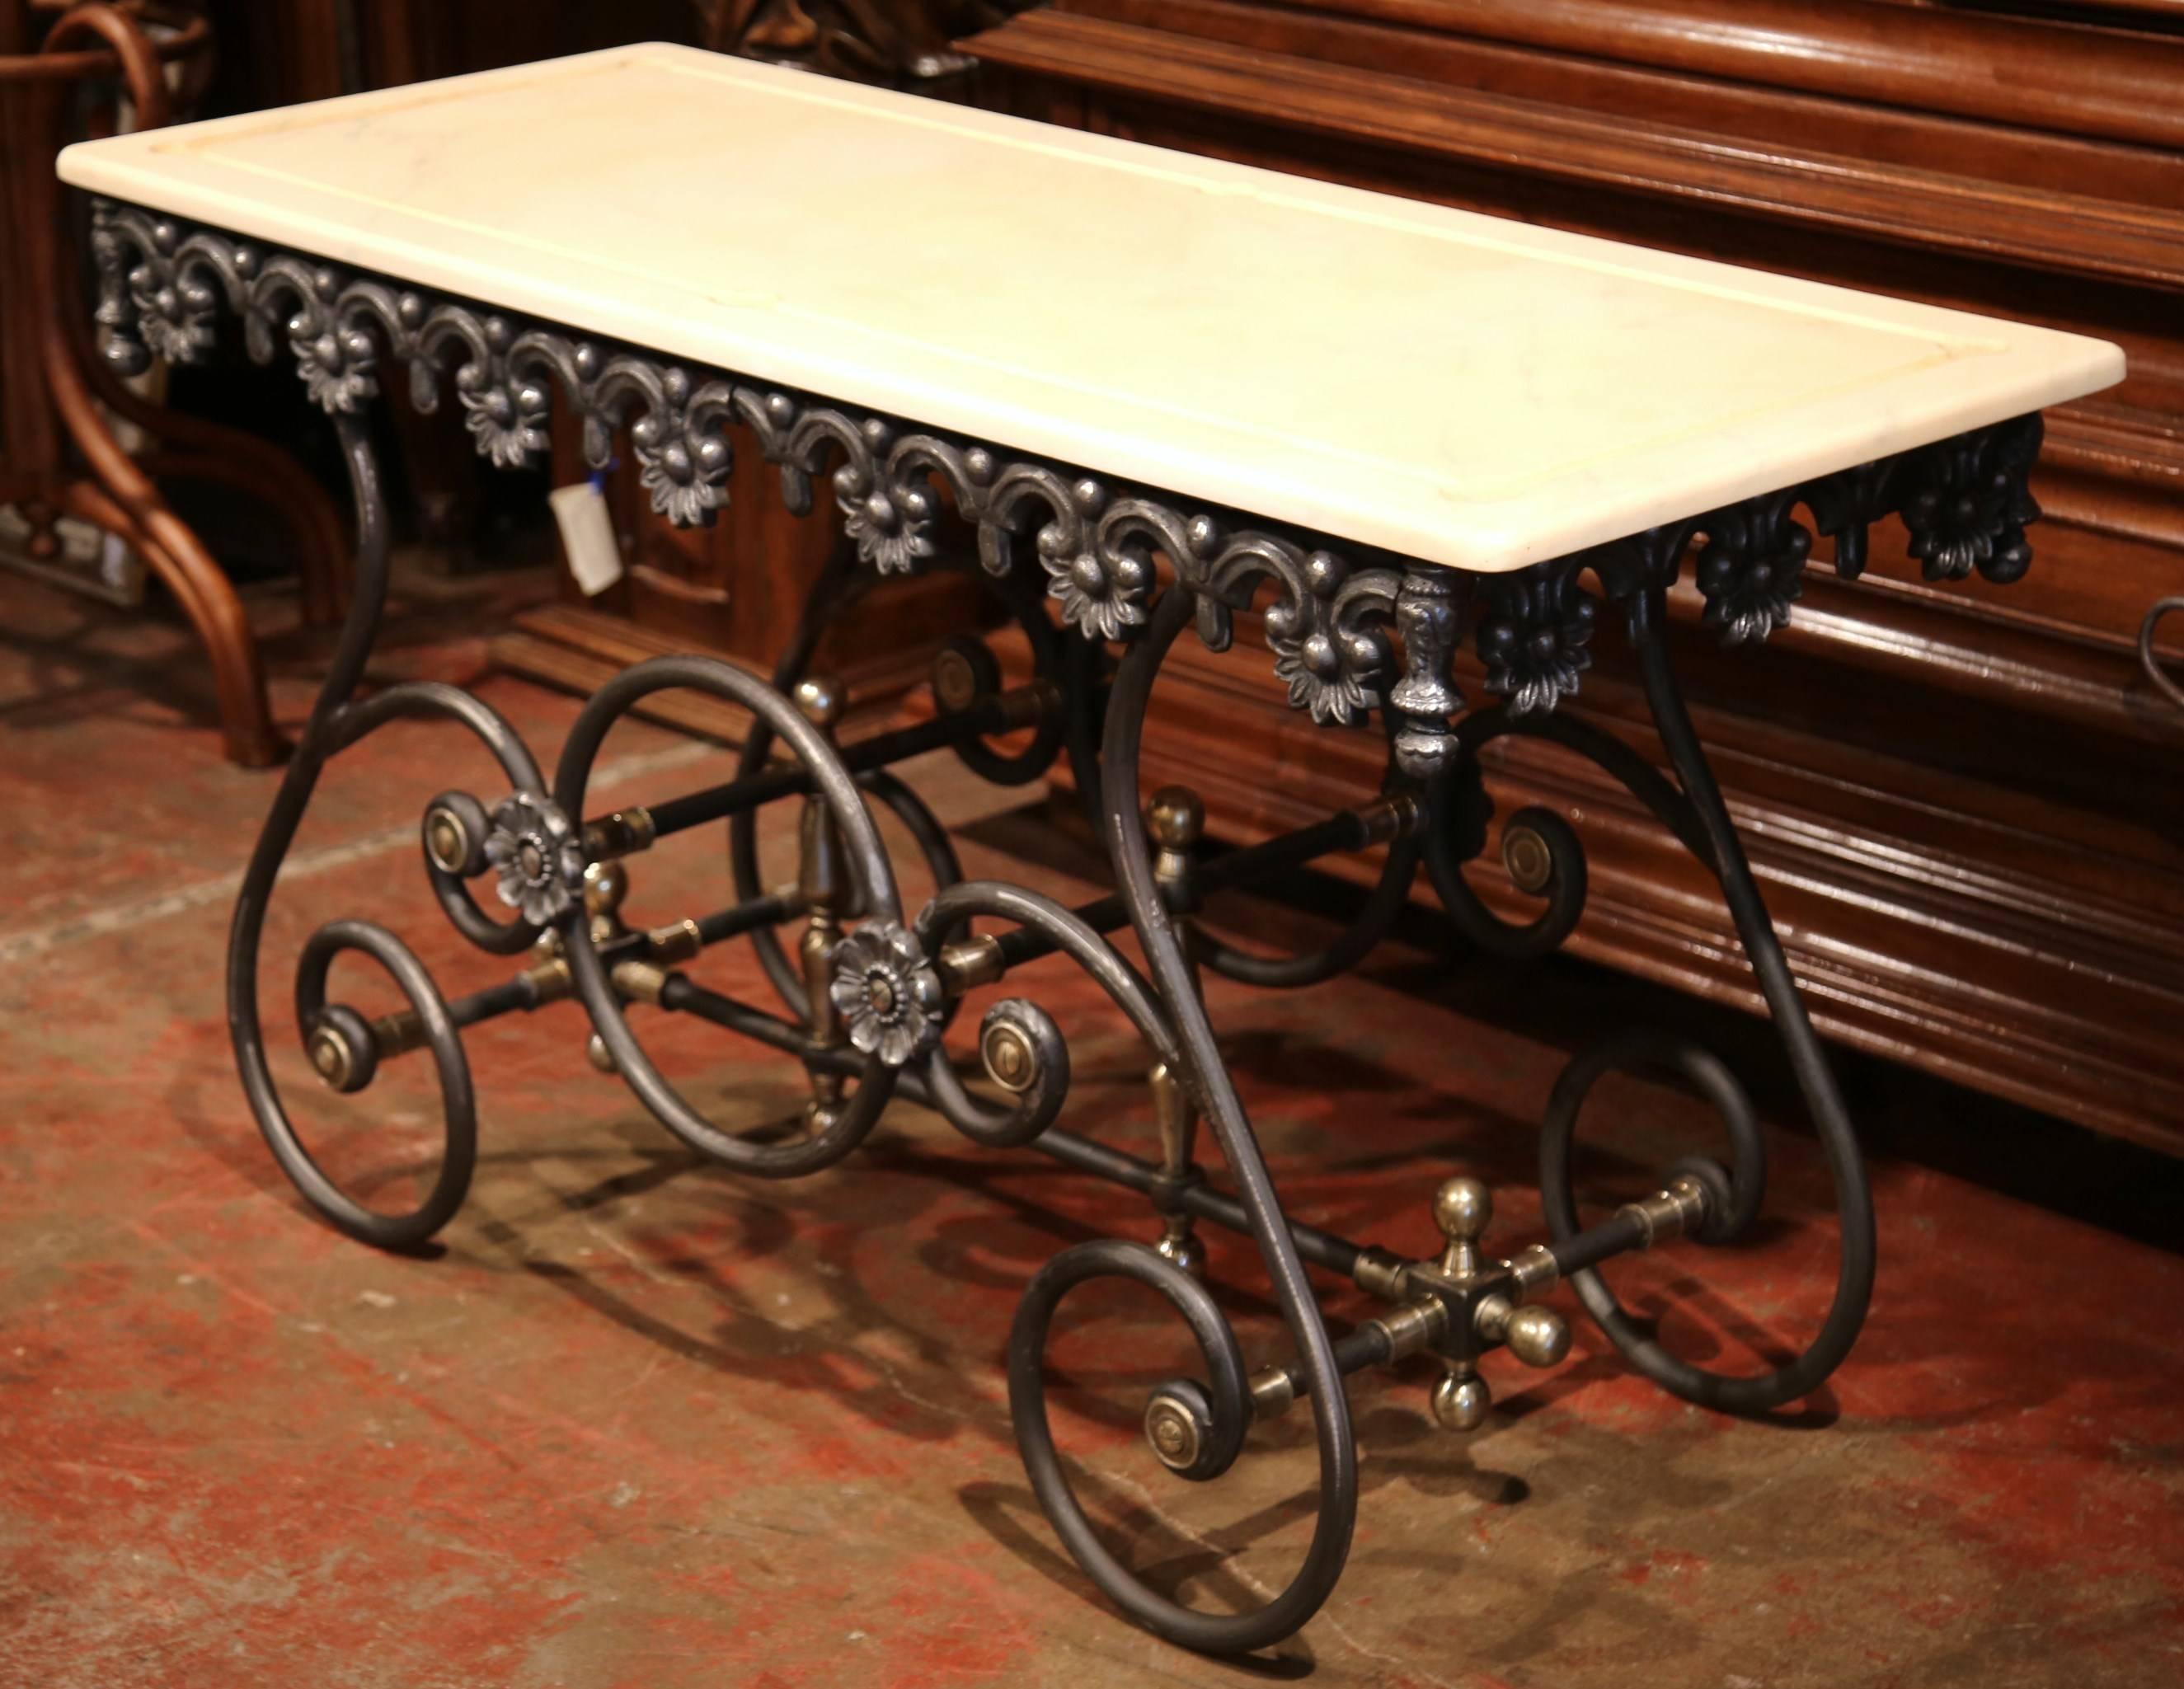 This long, narrow French butcher table (or pastry table) would add the ideal amount of surface space to any kitchen. This table has a polished iron finish and features a scalloped apron with intricate metal work and beautiful scrolled legs. The